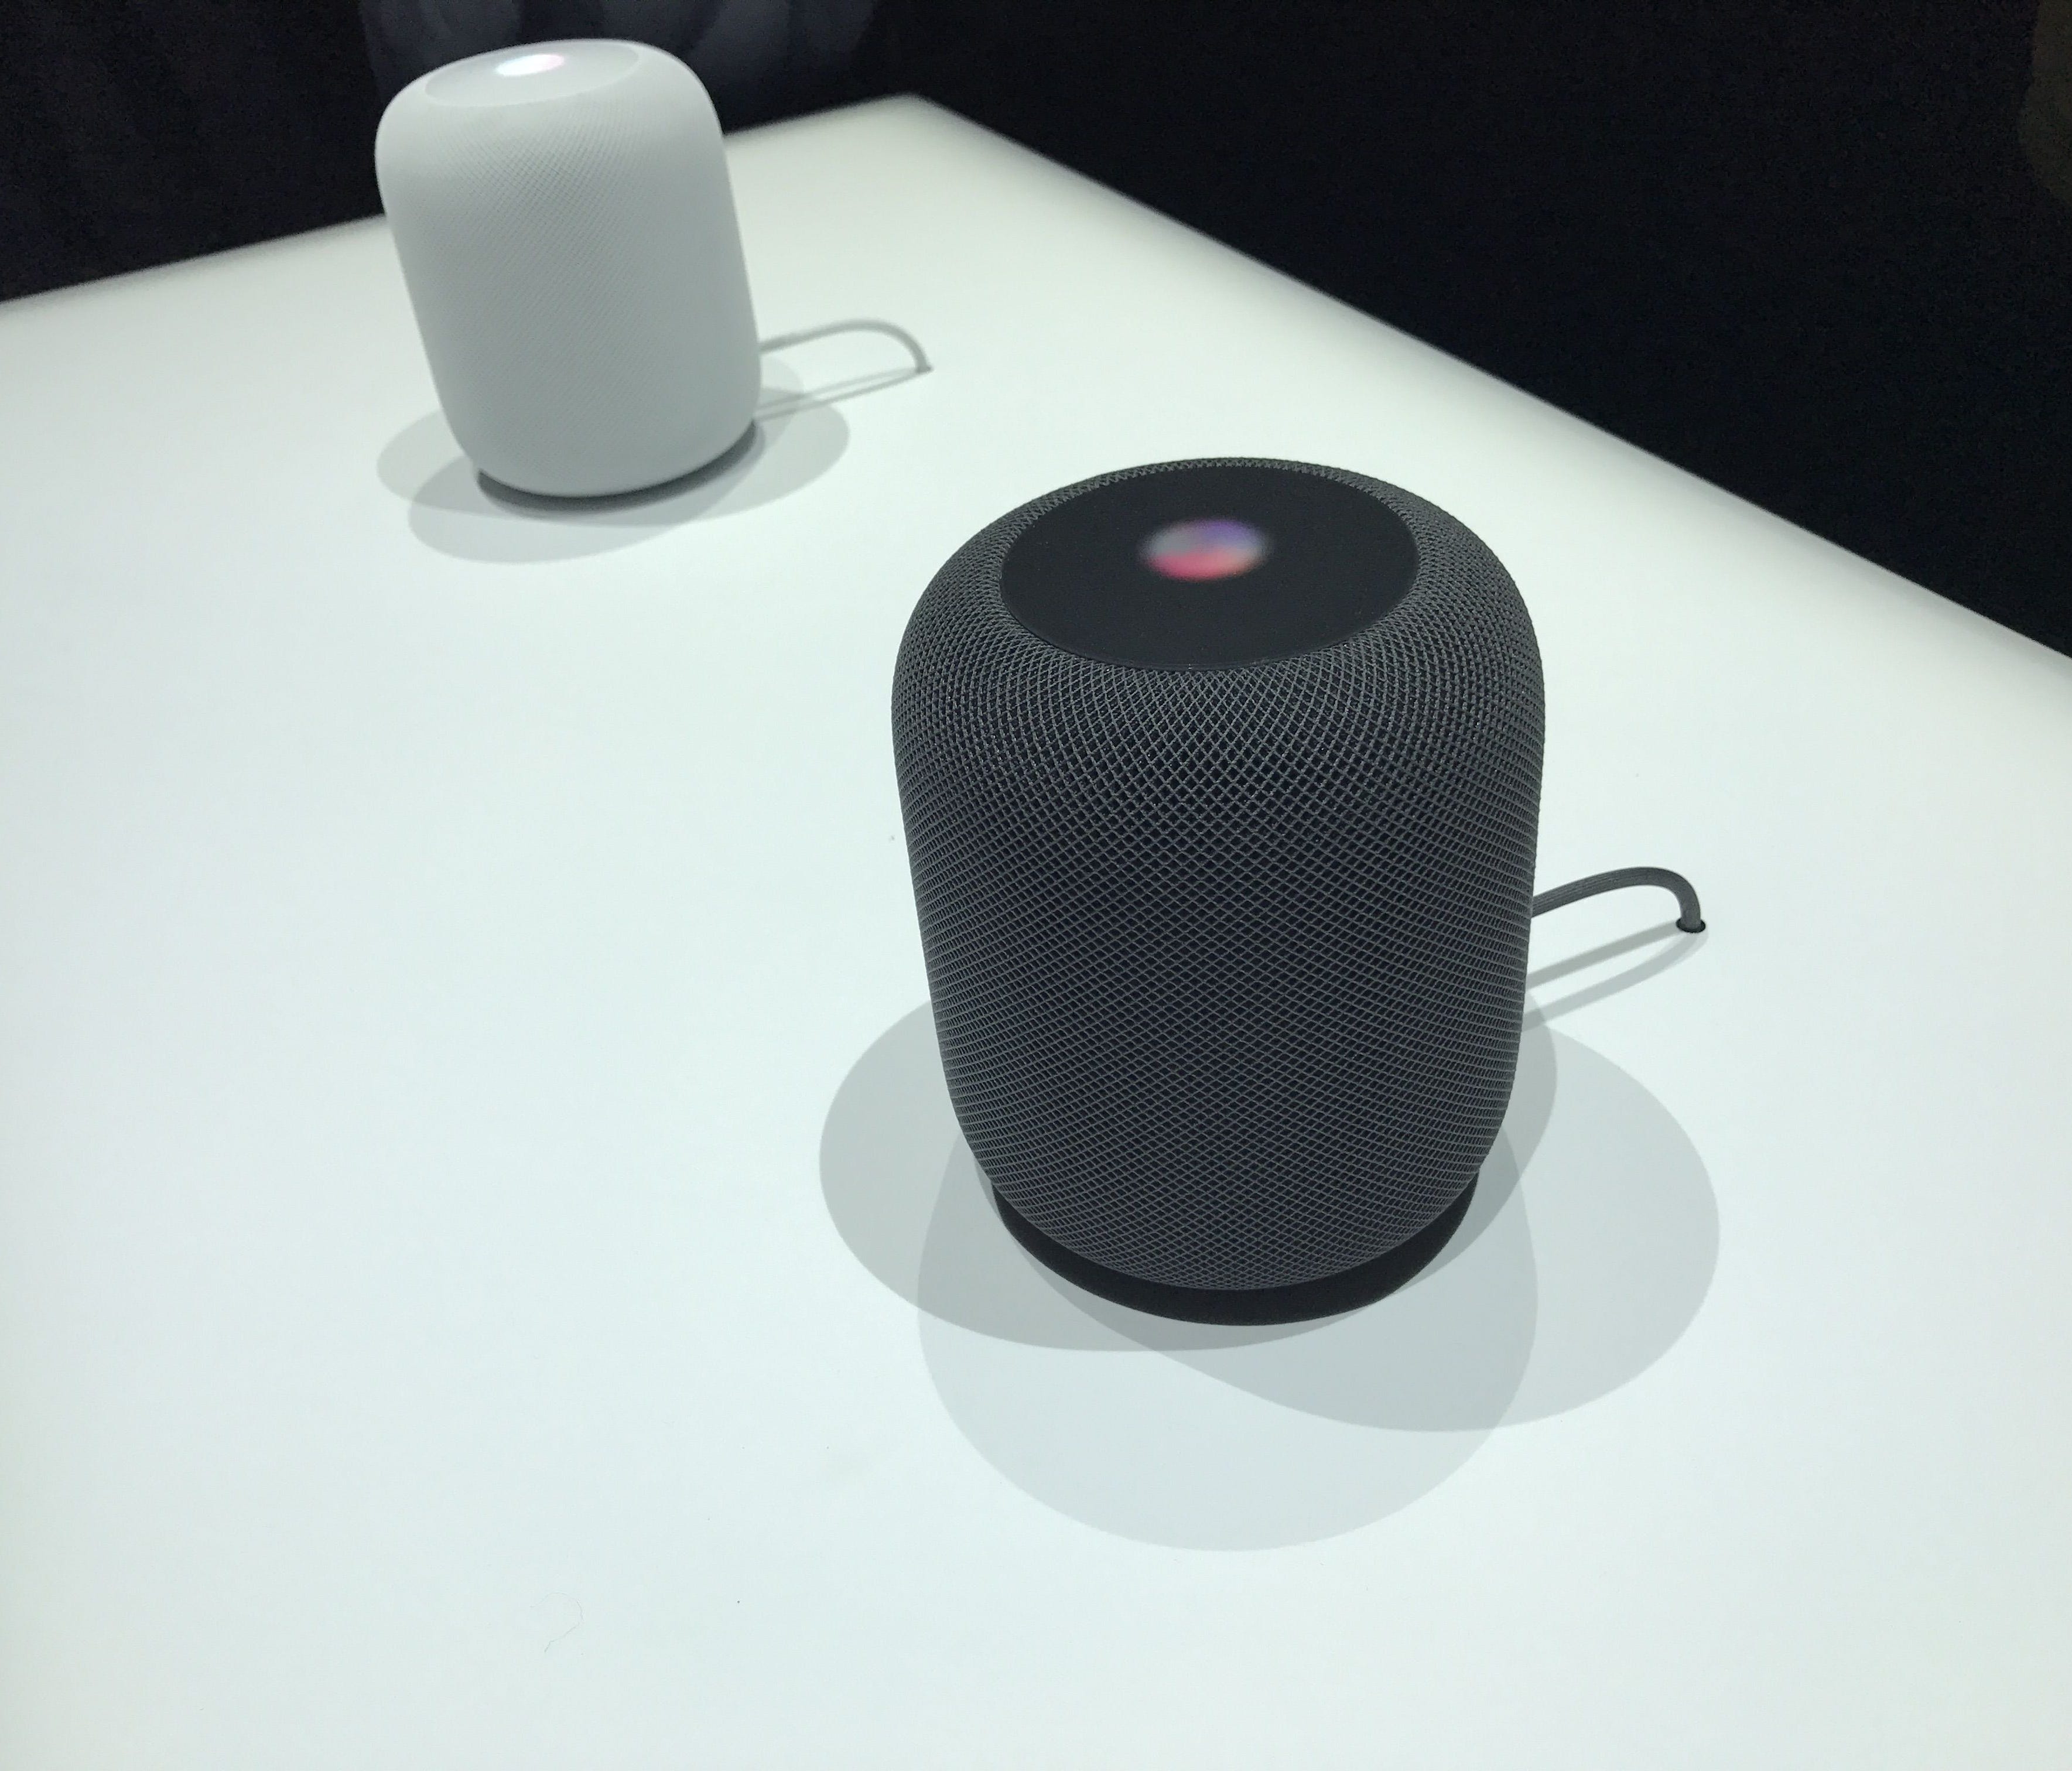 Apple's new HomePod speakers on display at the Worldwide Developer's Conference